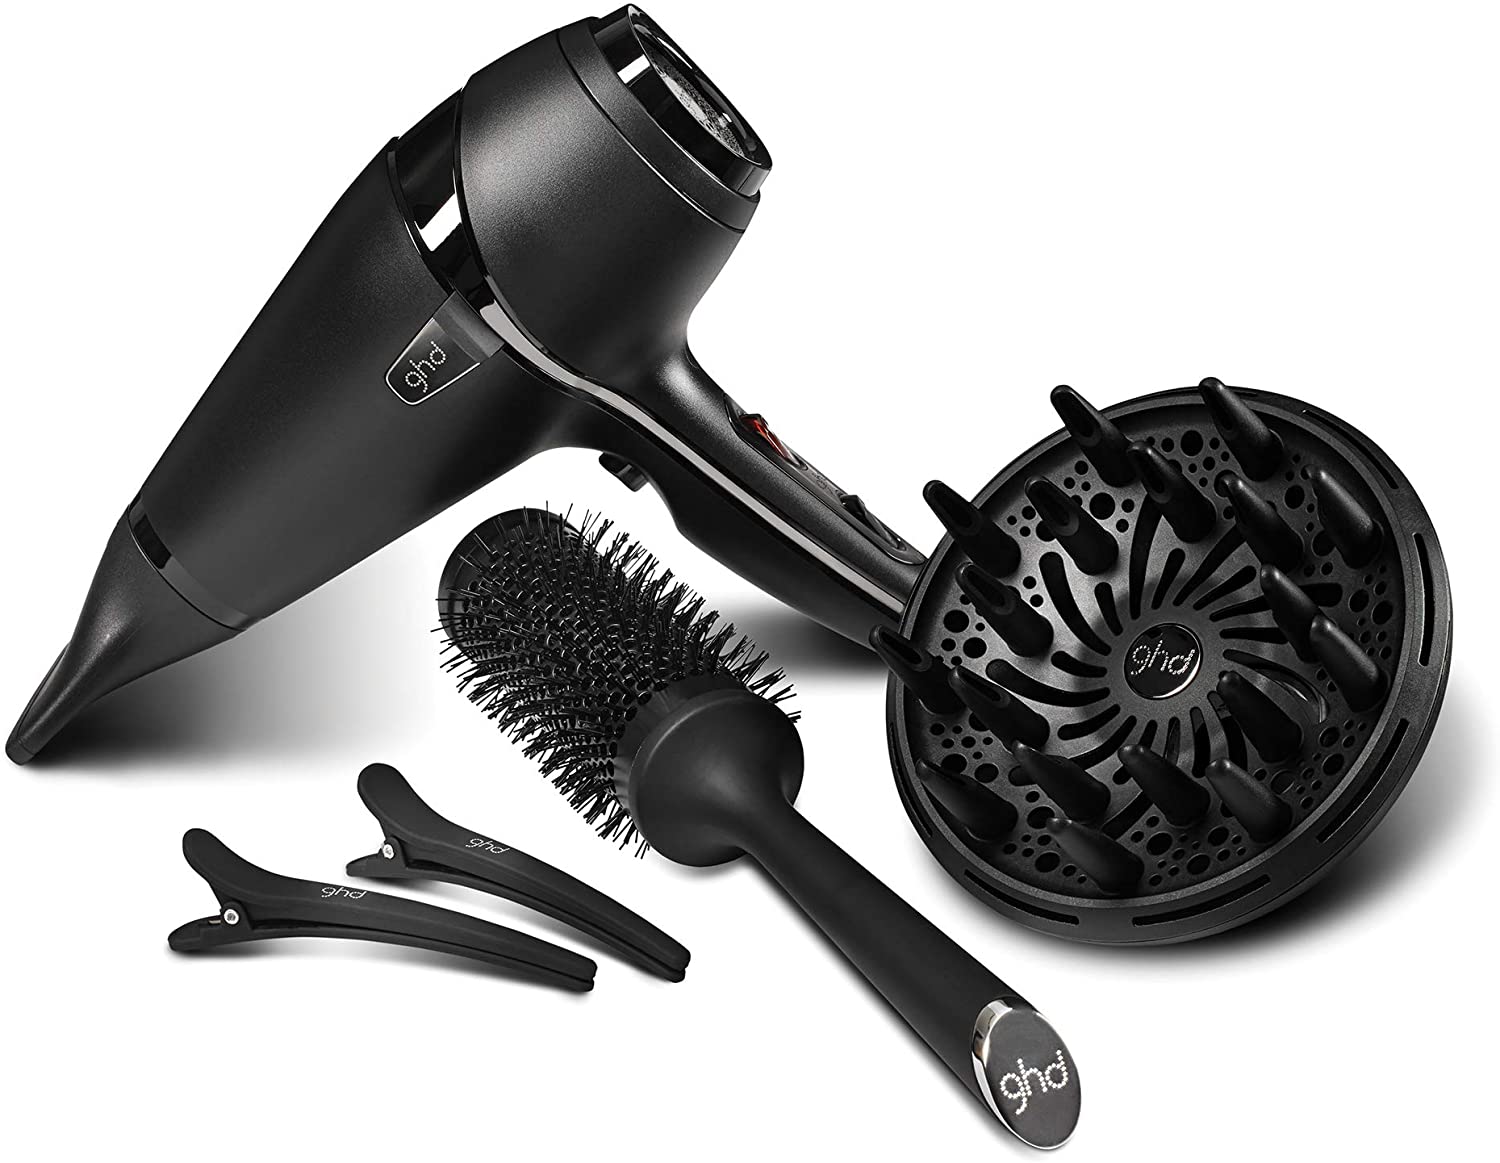 ghd air hair drying kit, professional hair dryer with diffuser, brush, clips and storage bag.